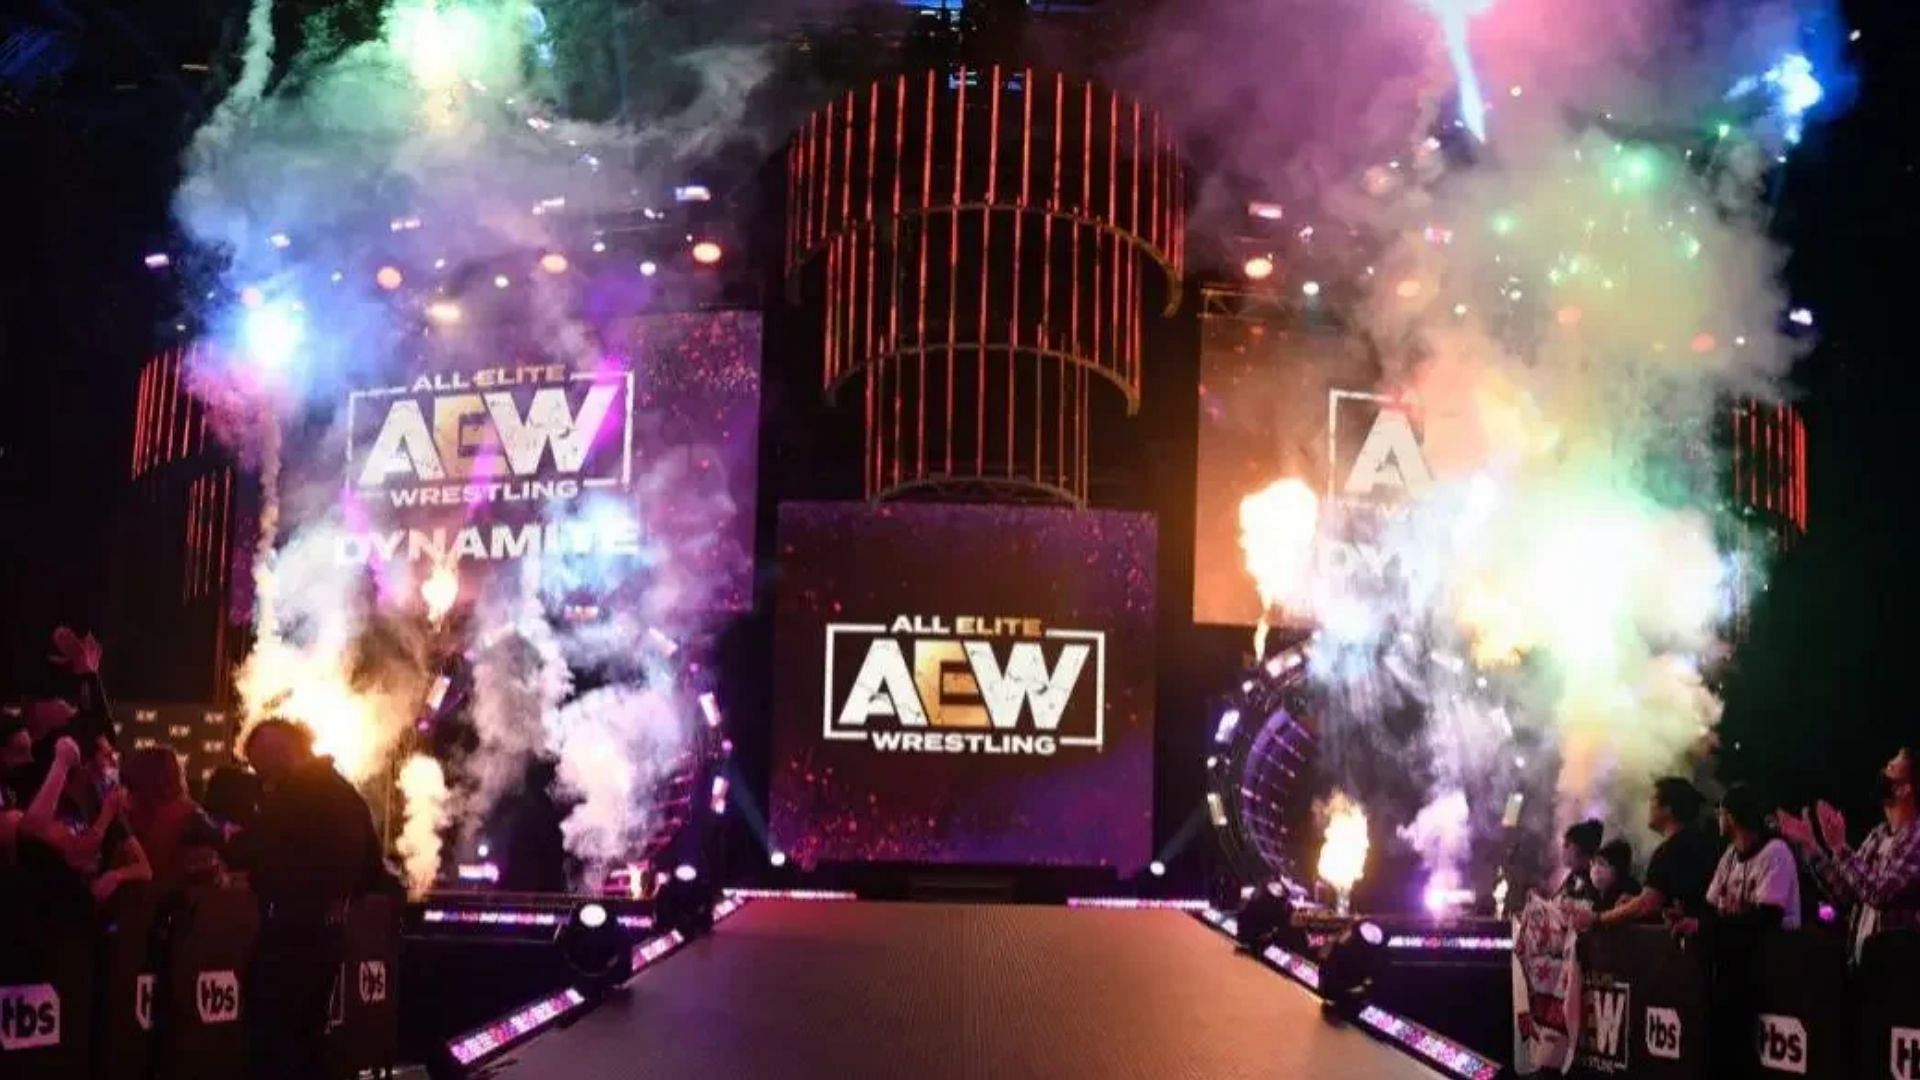 Has this star since found her place in the AEW locker room?